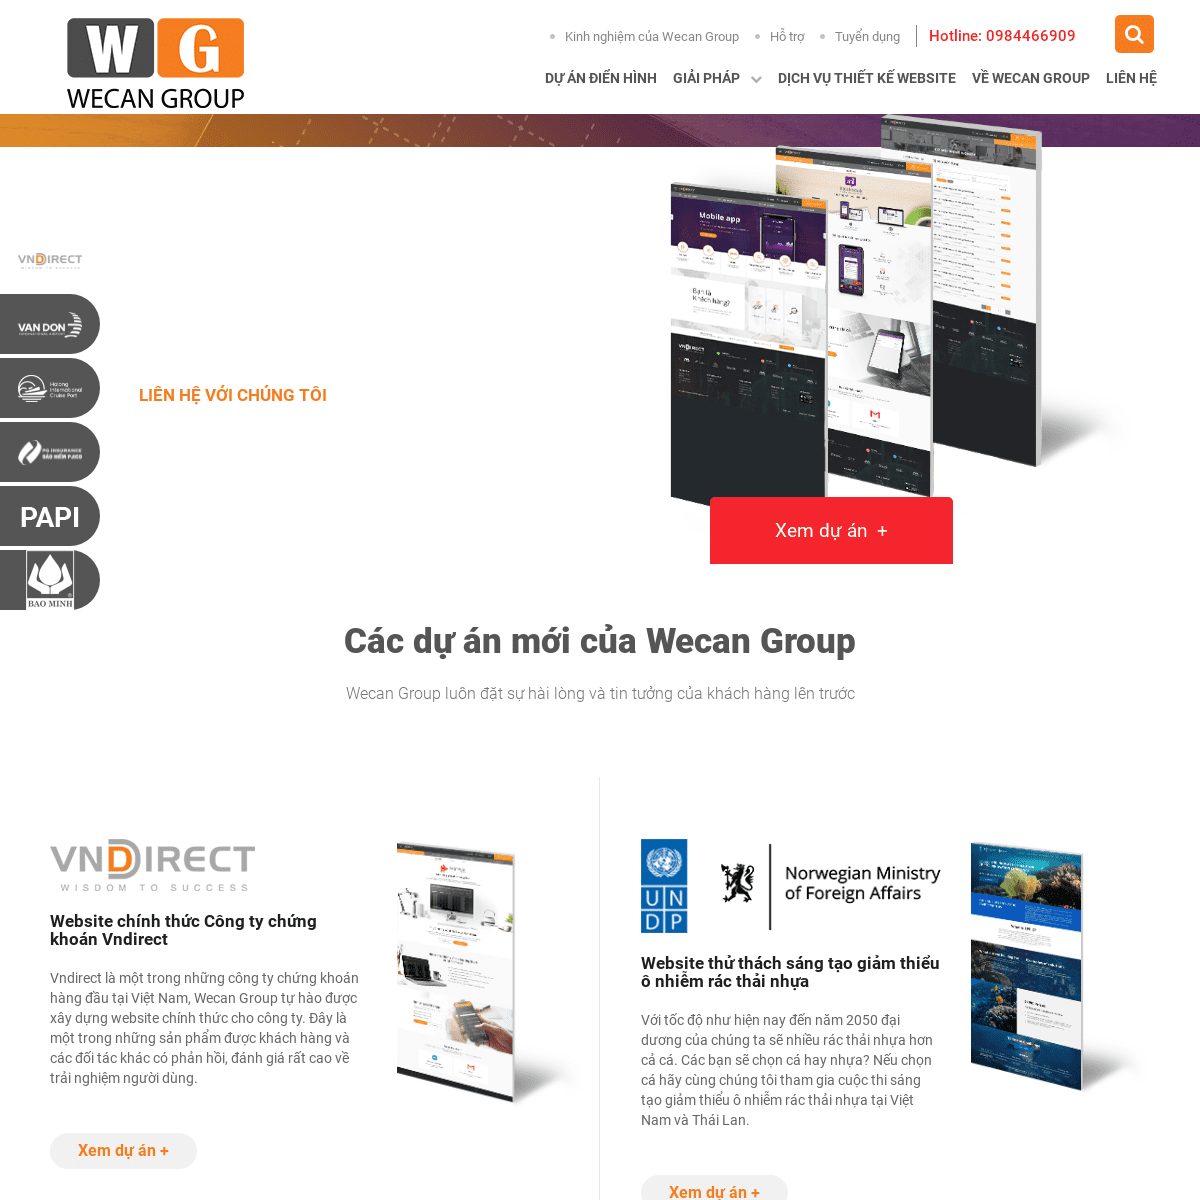 A complete backup of https://wecan-group.com